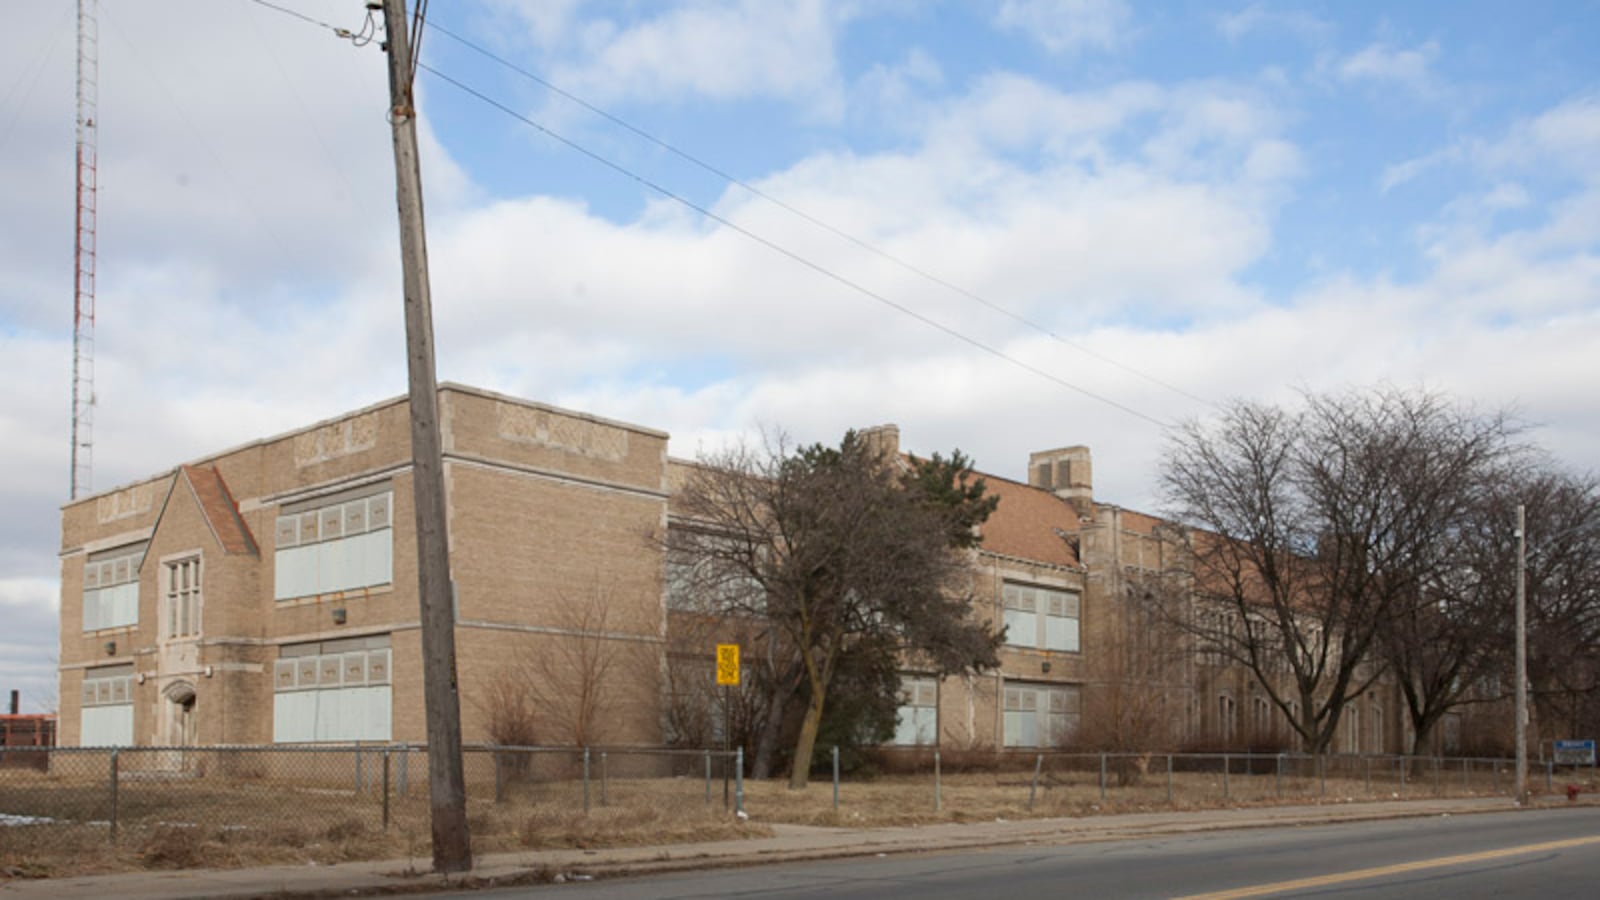 Plans for the new Detroit Latin School involve renovating the former Brady Elementary School building on Detroit's west side.